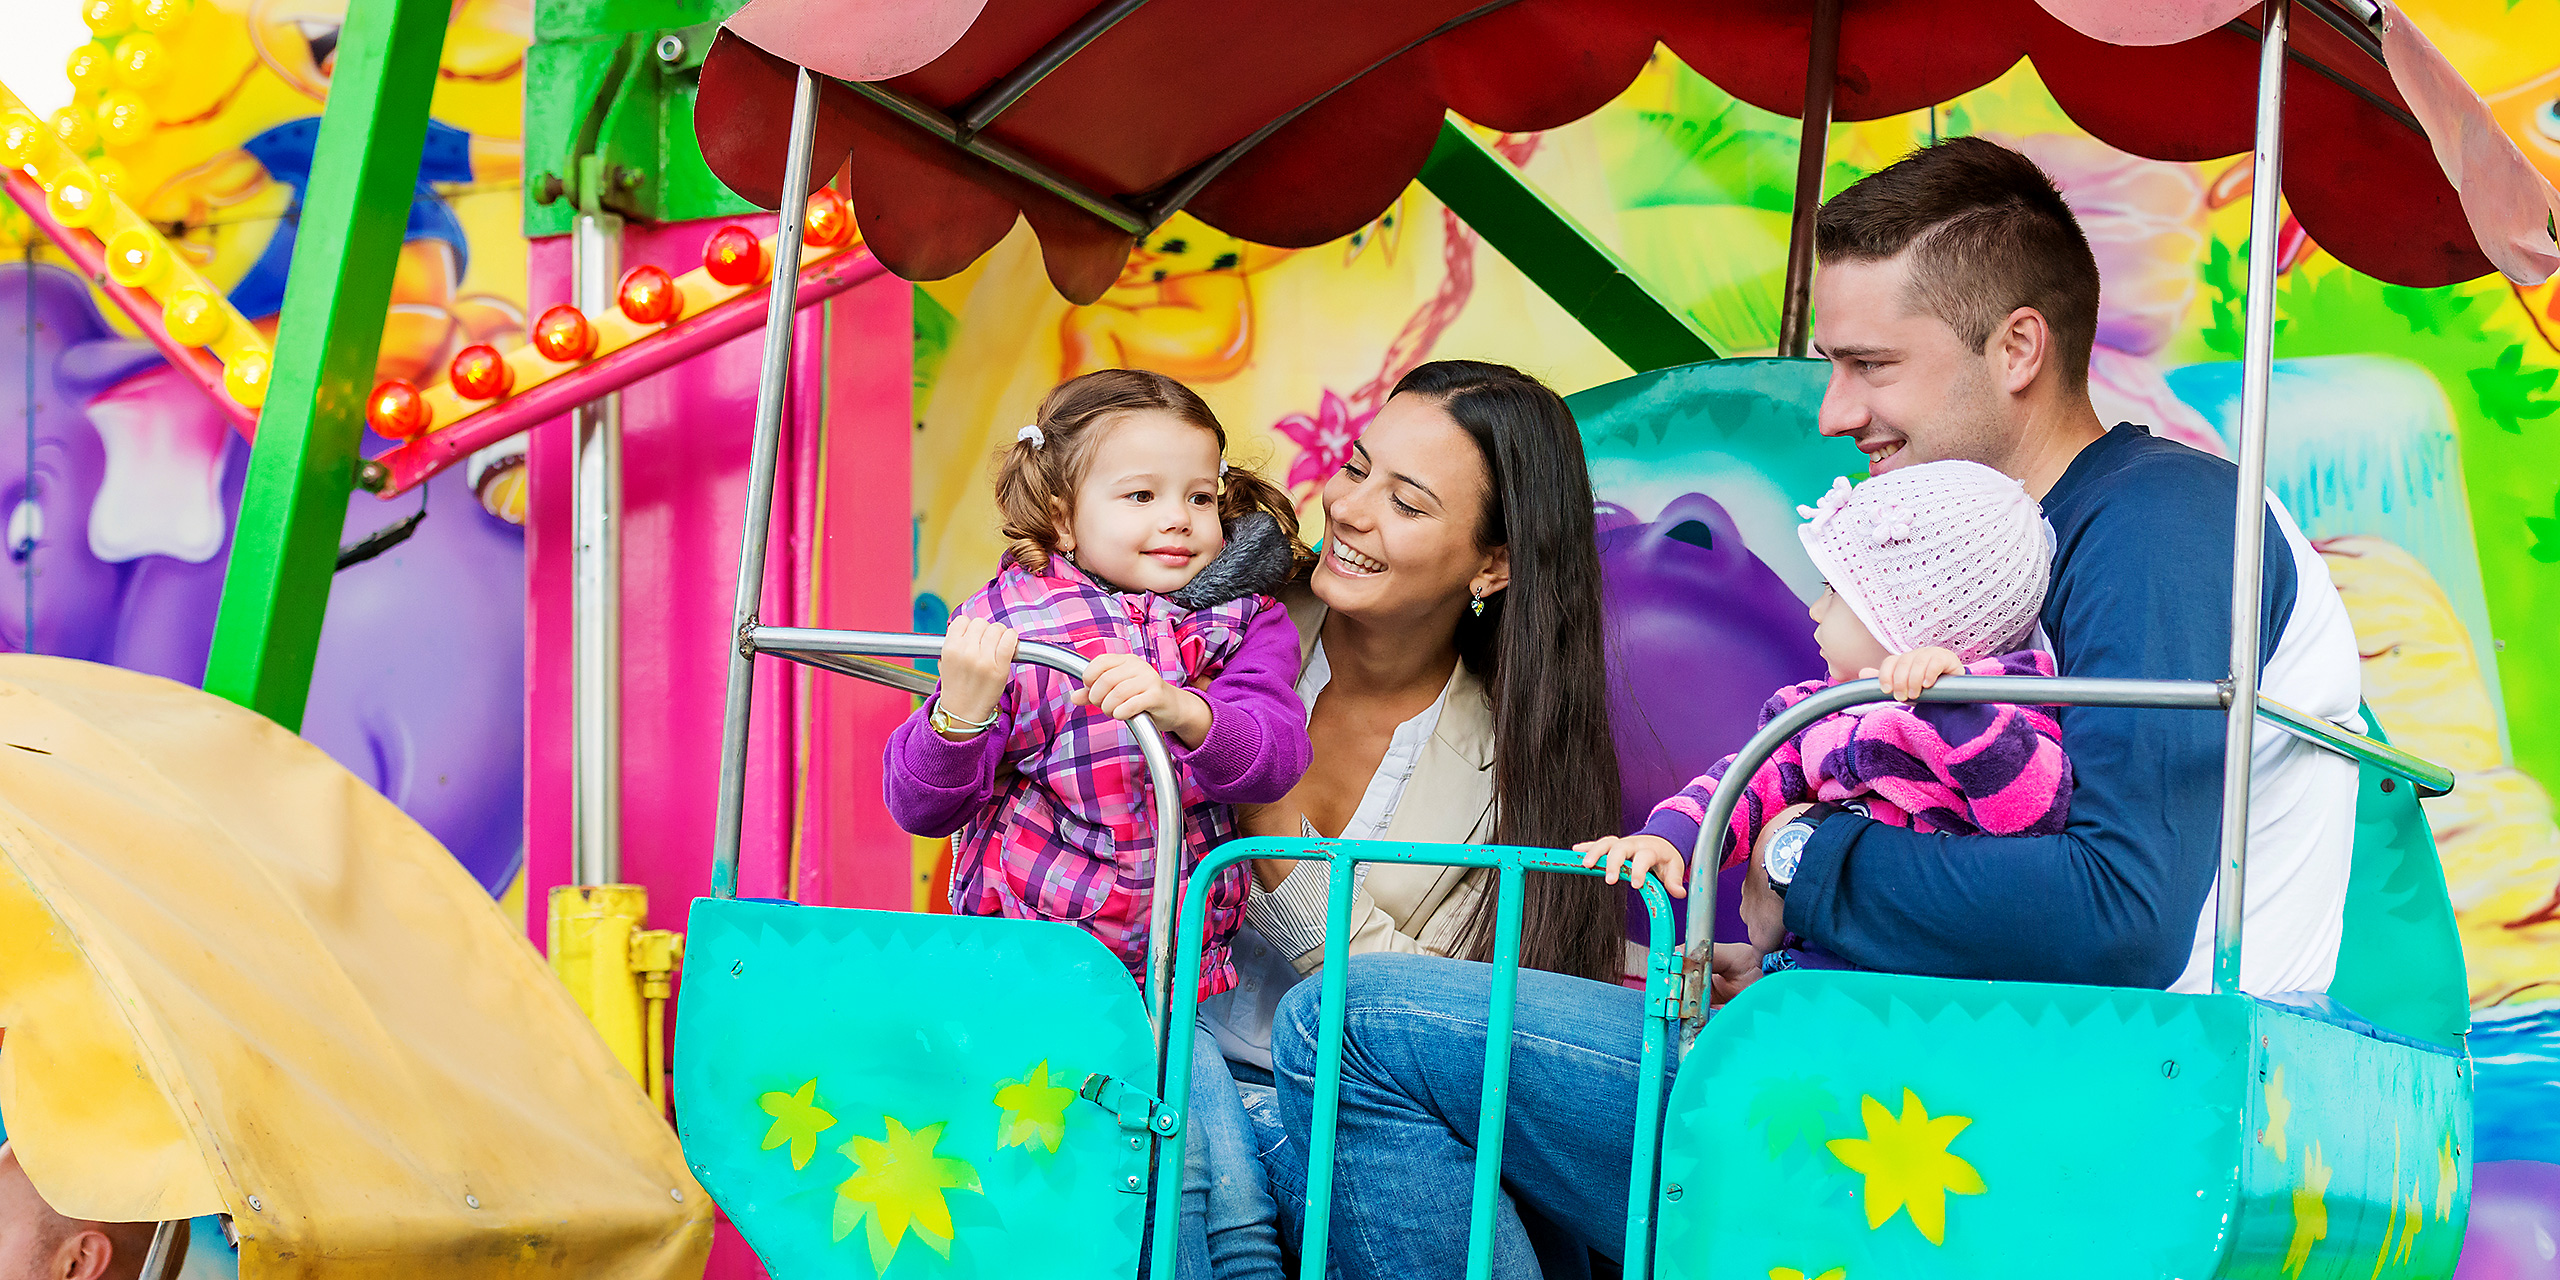 12 Best Amusement Parks For Toddlers And Young Kids 2020